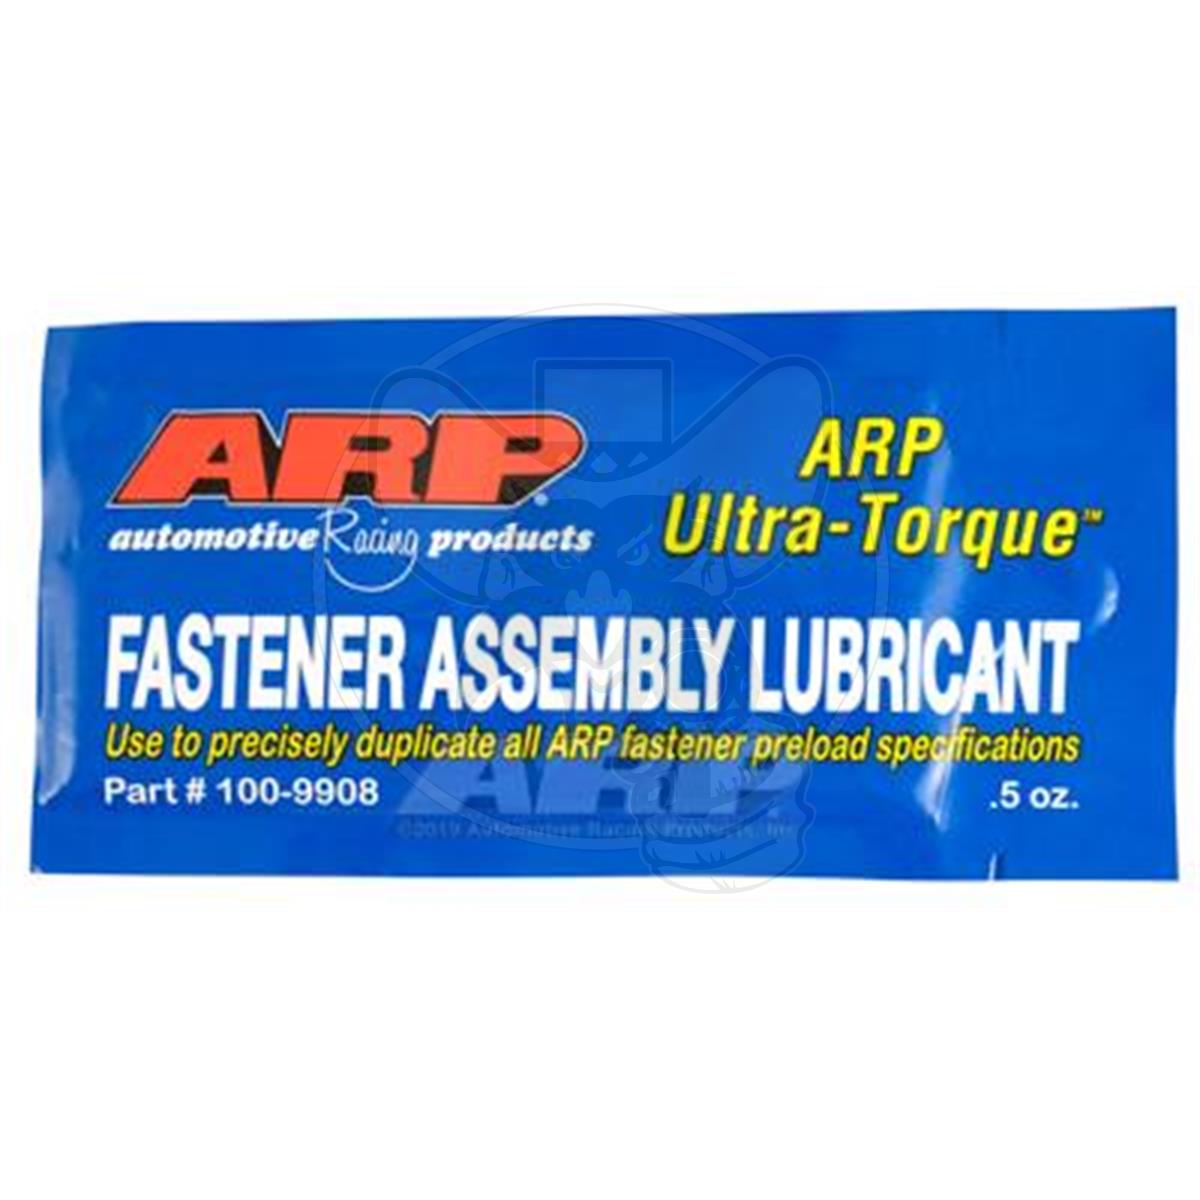 ARP FASTENER ASSEMBLY LUBRICANT FOR STUDS & NUTS 0.5 OUNCE